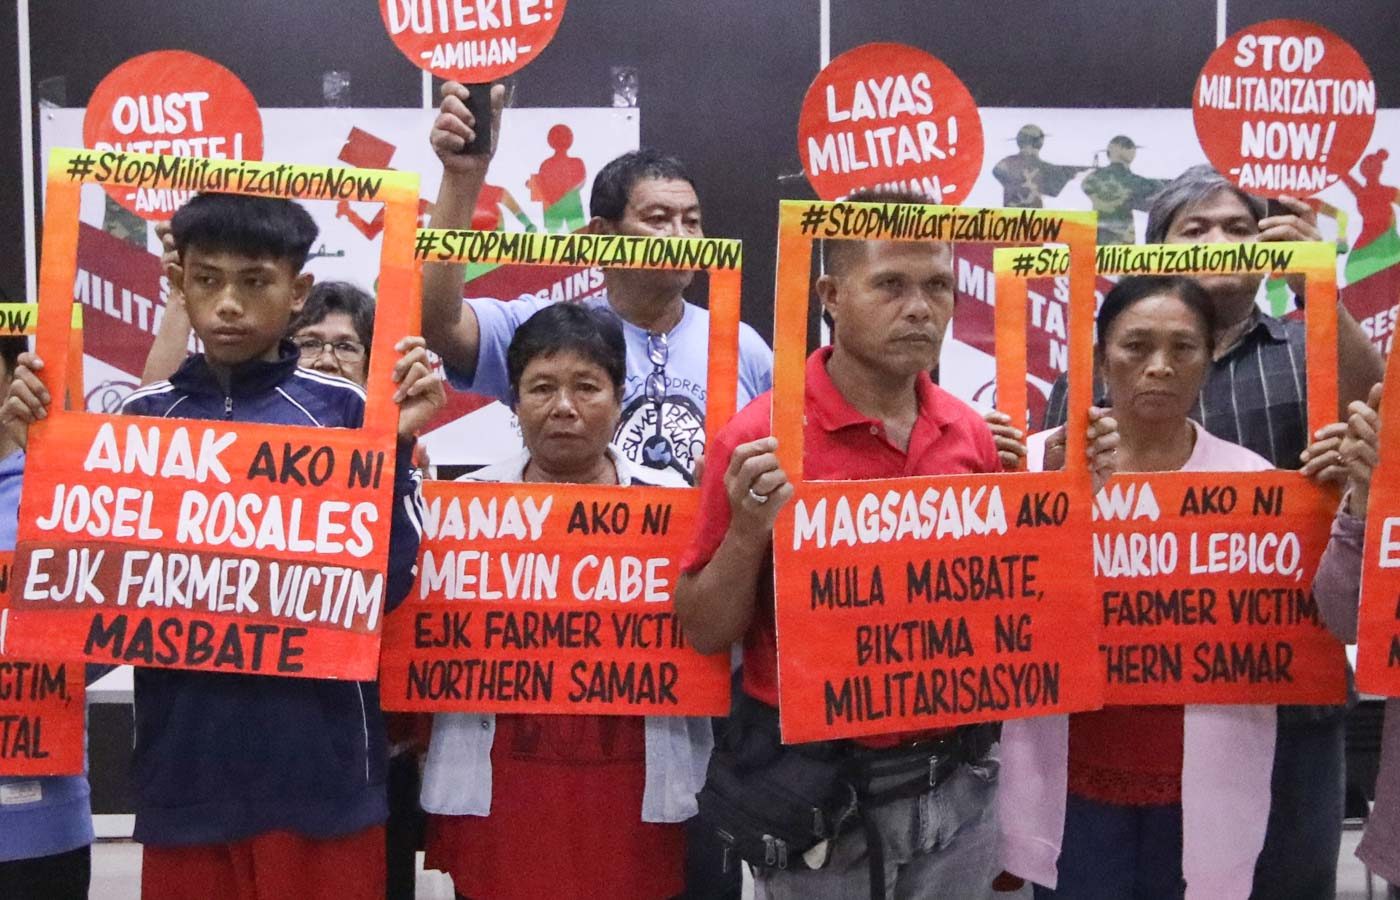 APPEAL. A few days before Duterte's State the Nation Address, peasant women group Amihan together with the families of victims of EJK and militarization appeal to the UNHRC and CHR at a press conference in Quezon City on Friday, July 19, 2019. Photo by Darren Langit/Rappler 